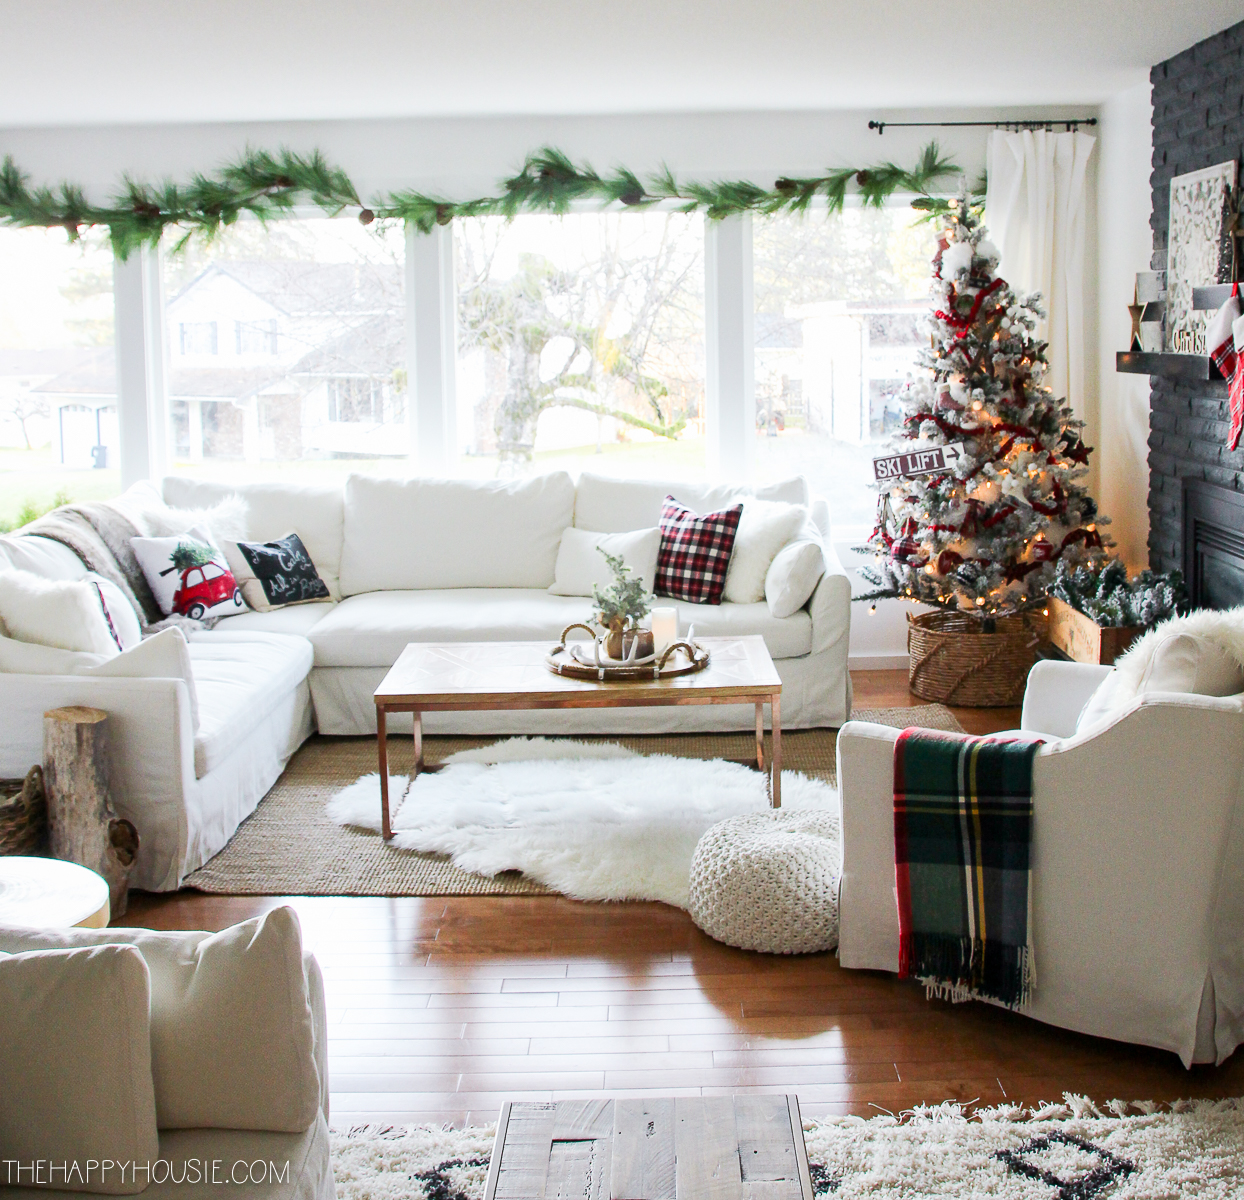 Light and bright living room with a tartan blanket and a tree in the corner of the room.